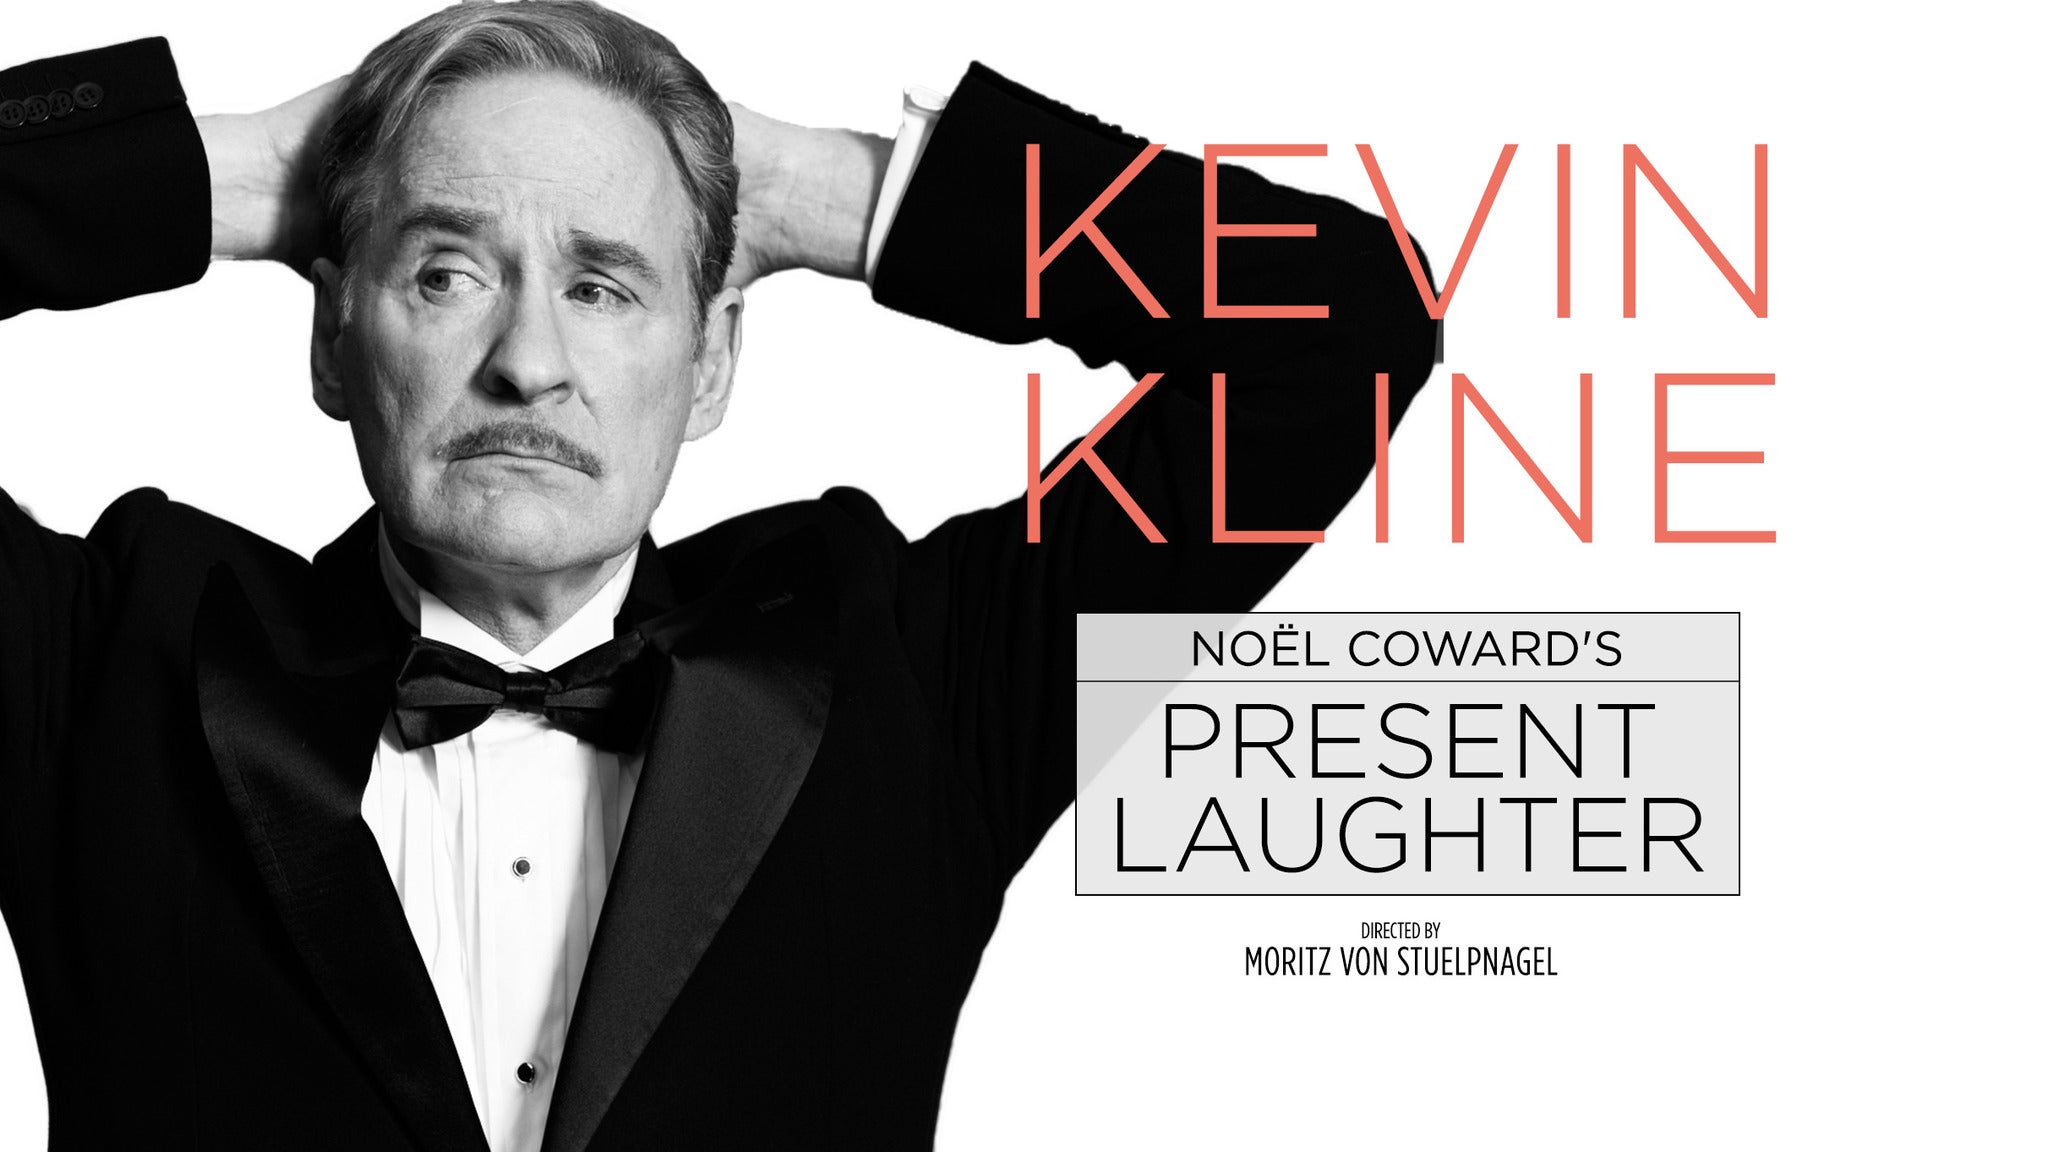 Buy Present Laughter (NY) tickets from the official Ticketmaster.com site. 